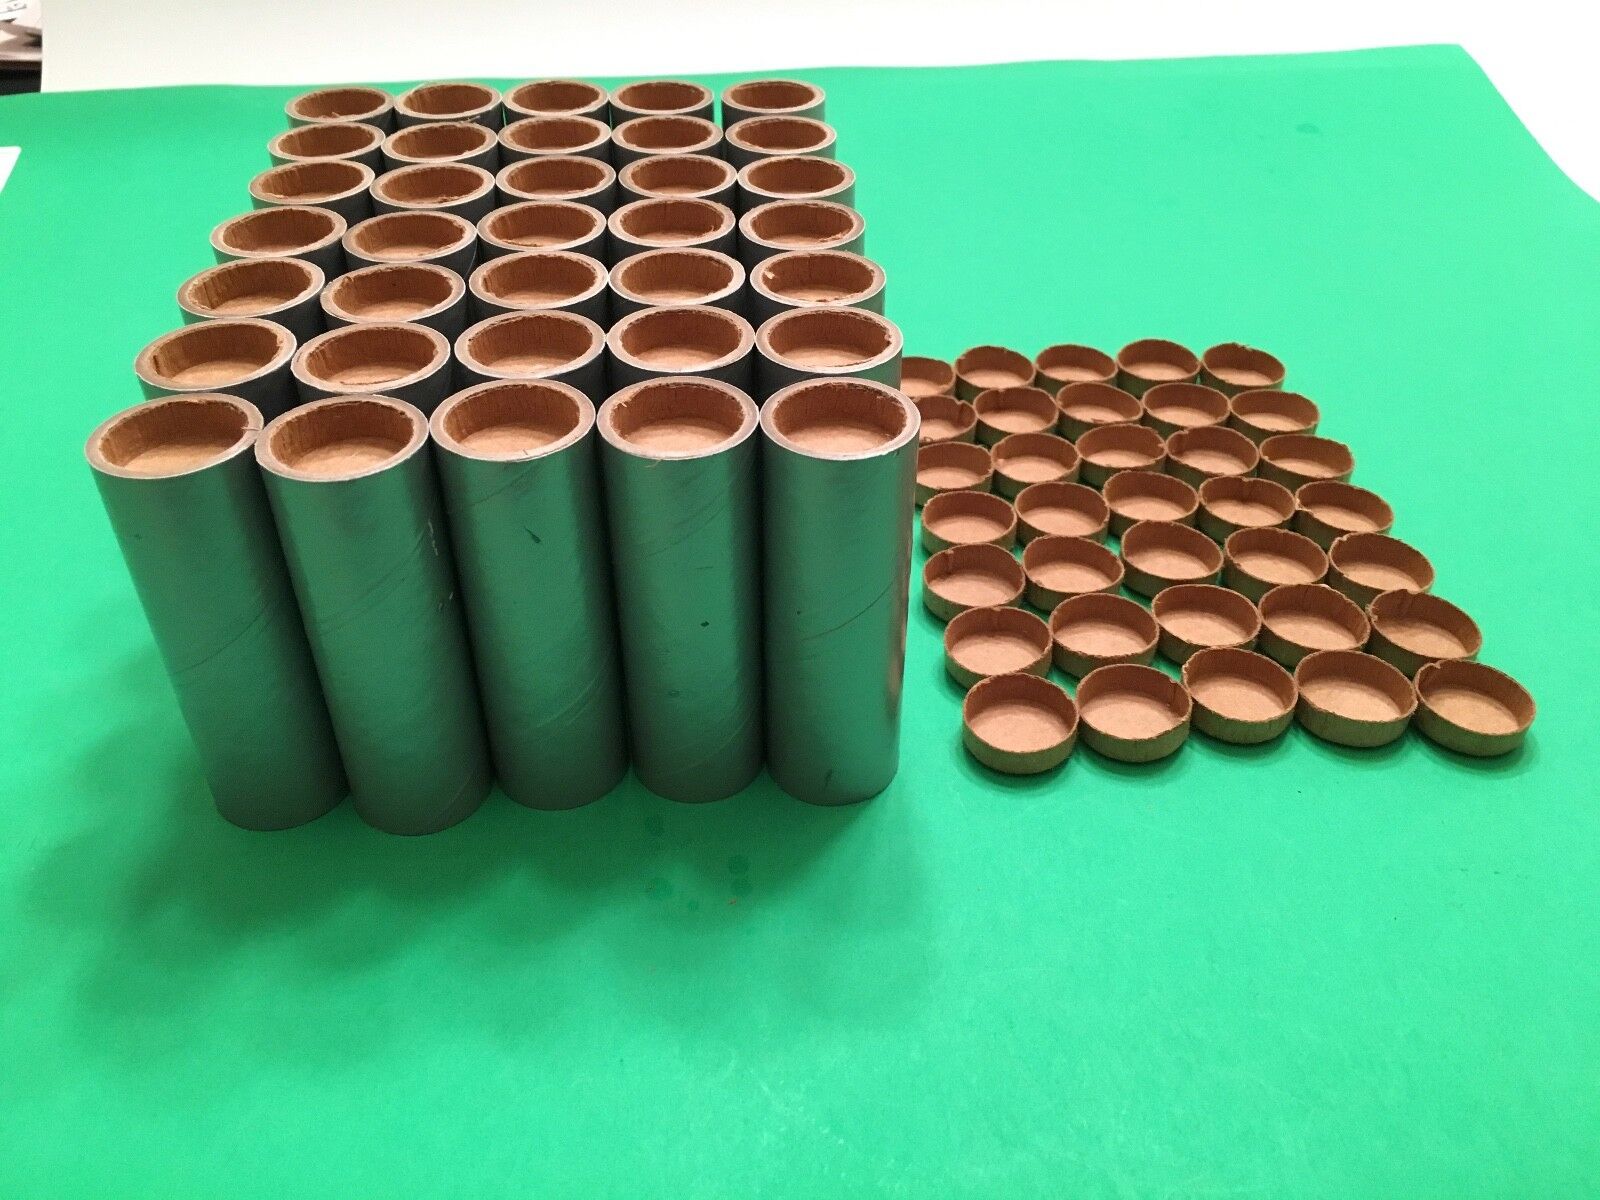 35 NEW Spiral 3 1/2"x1"x1/8" Fireworks Silver PYRO Cardboard Tubes W/End Plugs ! Unbranded Does Not Apply - фотография #5